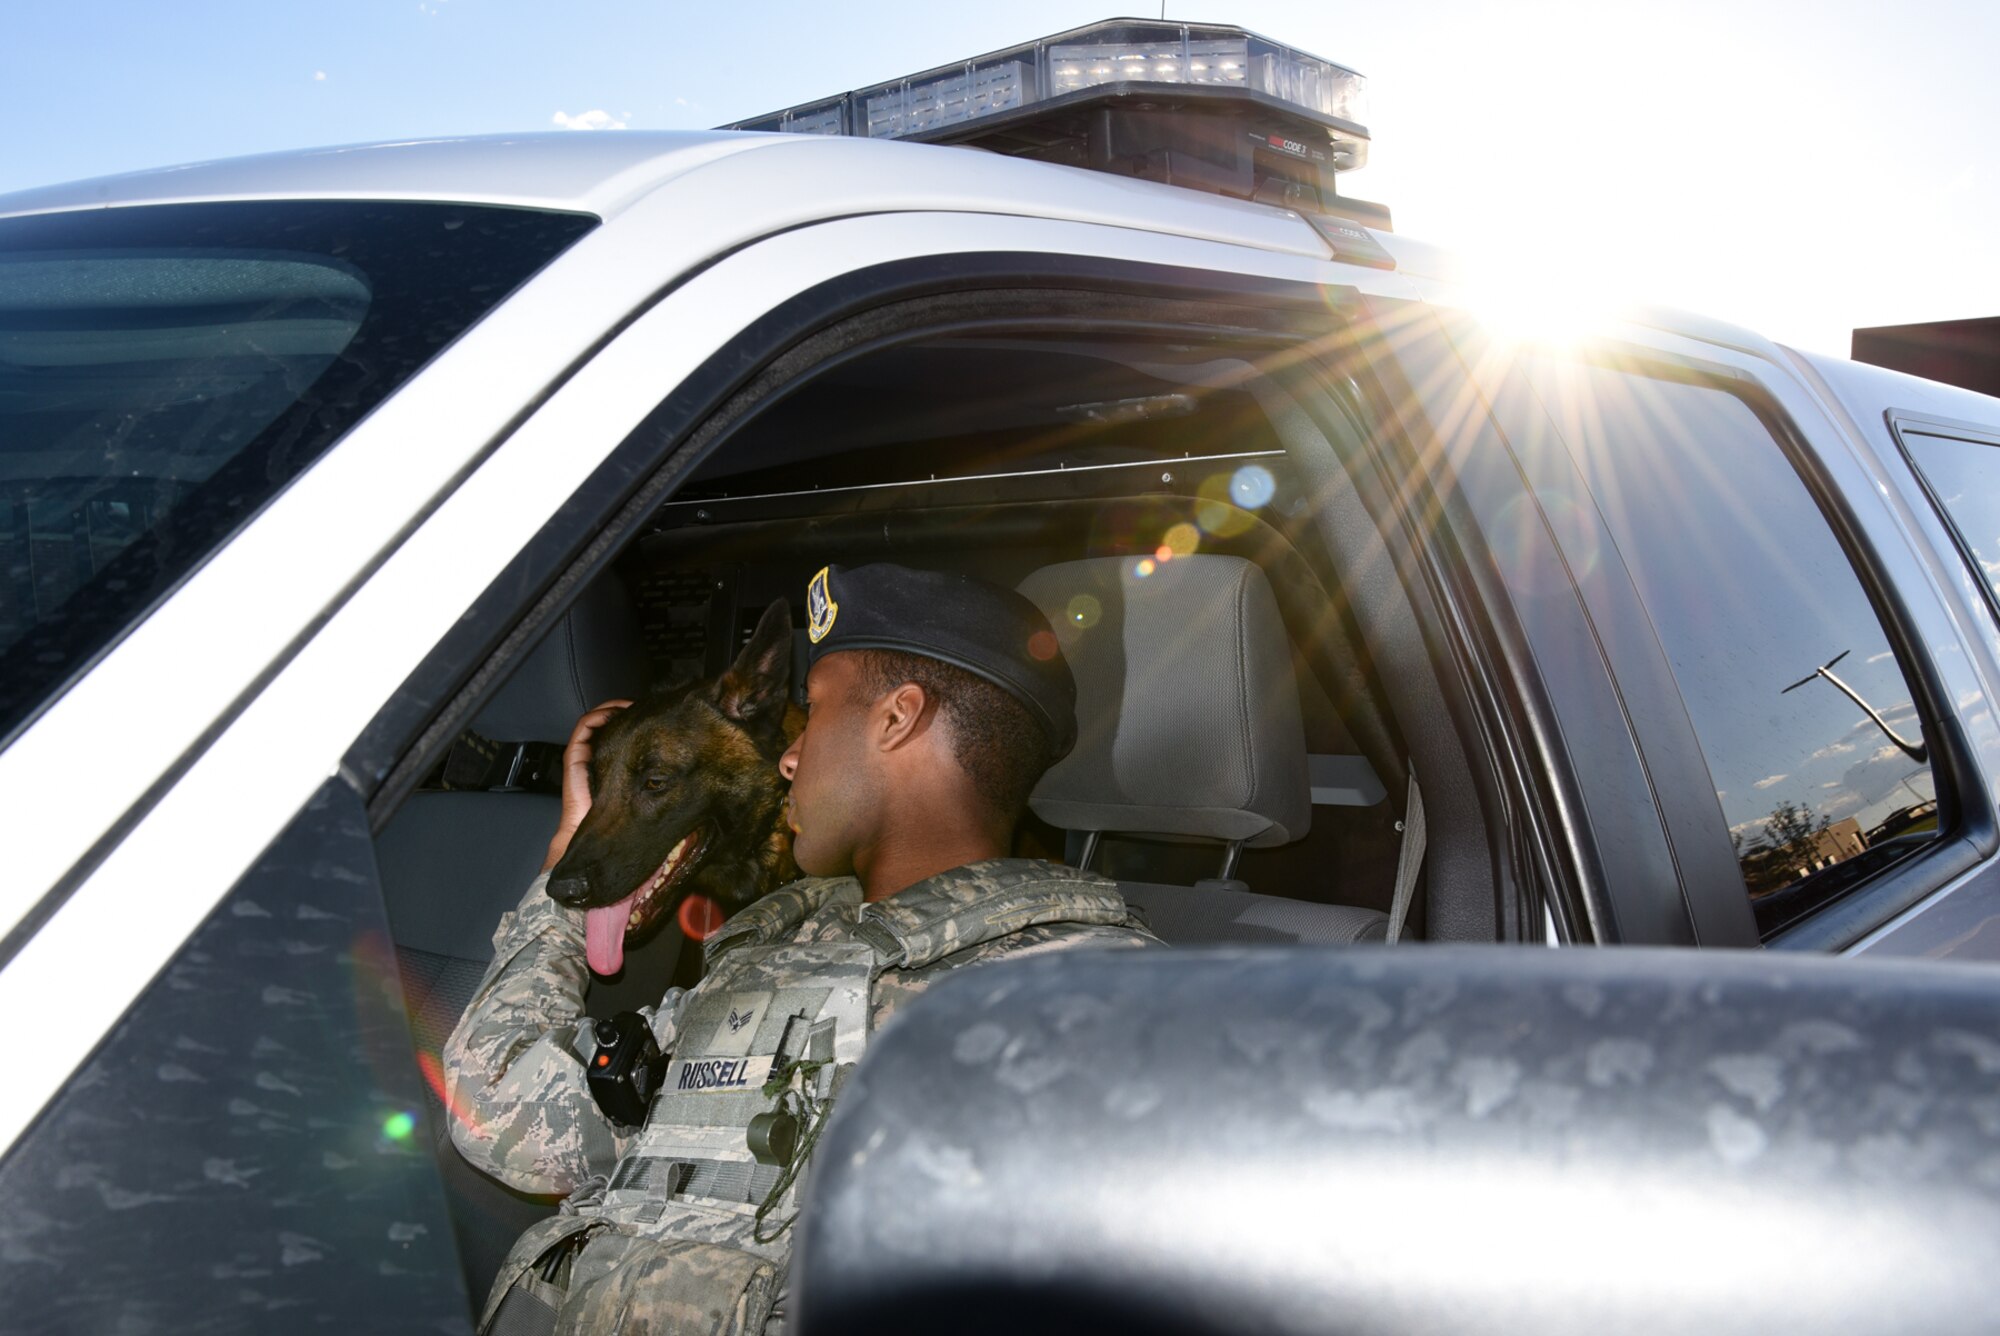 Senior Airman Tariq Russell, 21st Security Forces Squadron military working dog handler, praises his dog, Ppaul, before heading to his next job at Peterson Air Force Base, Colo., June 14, 2016. The relationship between Russell and Ppaul was commended by leadership as being one of the strongest they have witnessed. (U.S. Air Force photo by Airman 1st Class Dennis Hoffman)